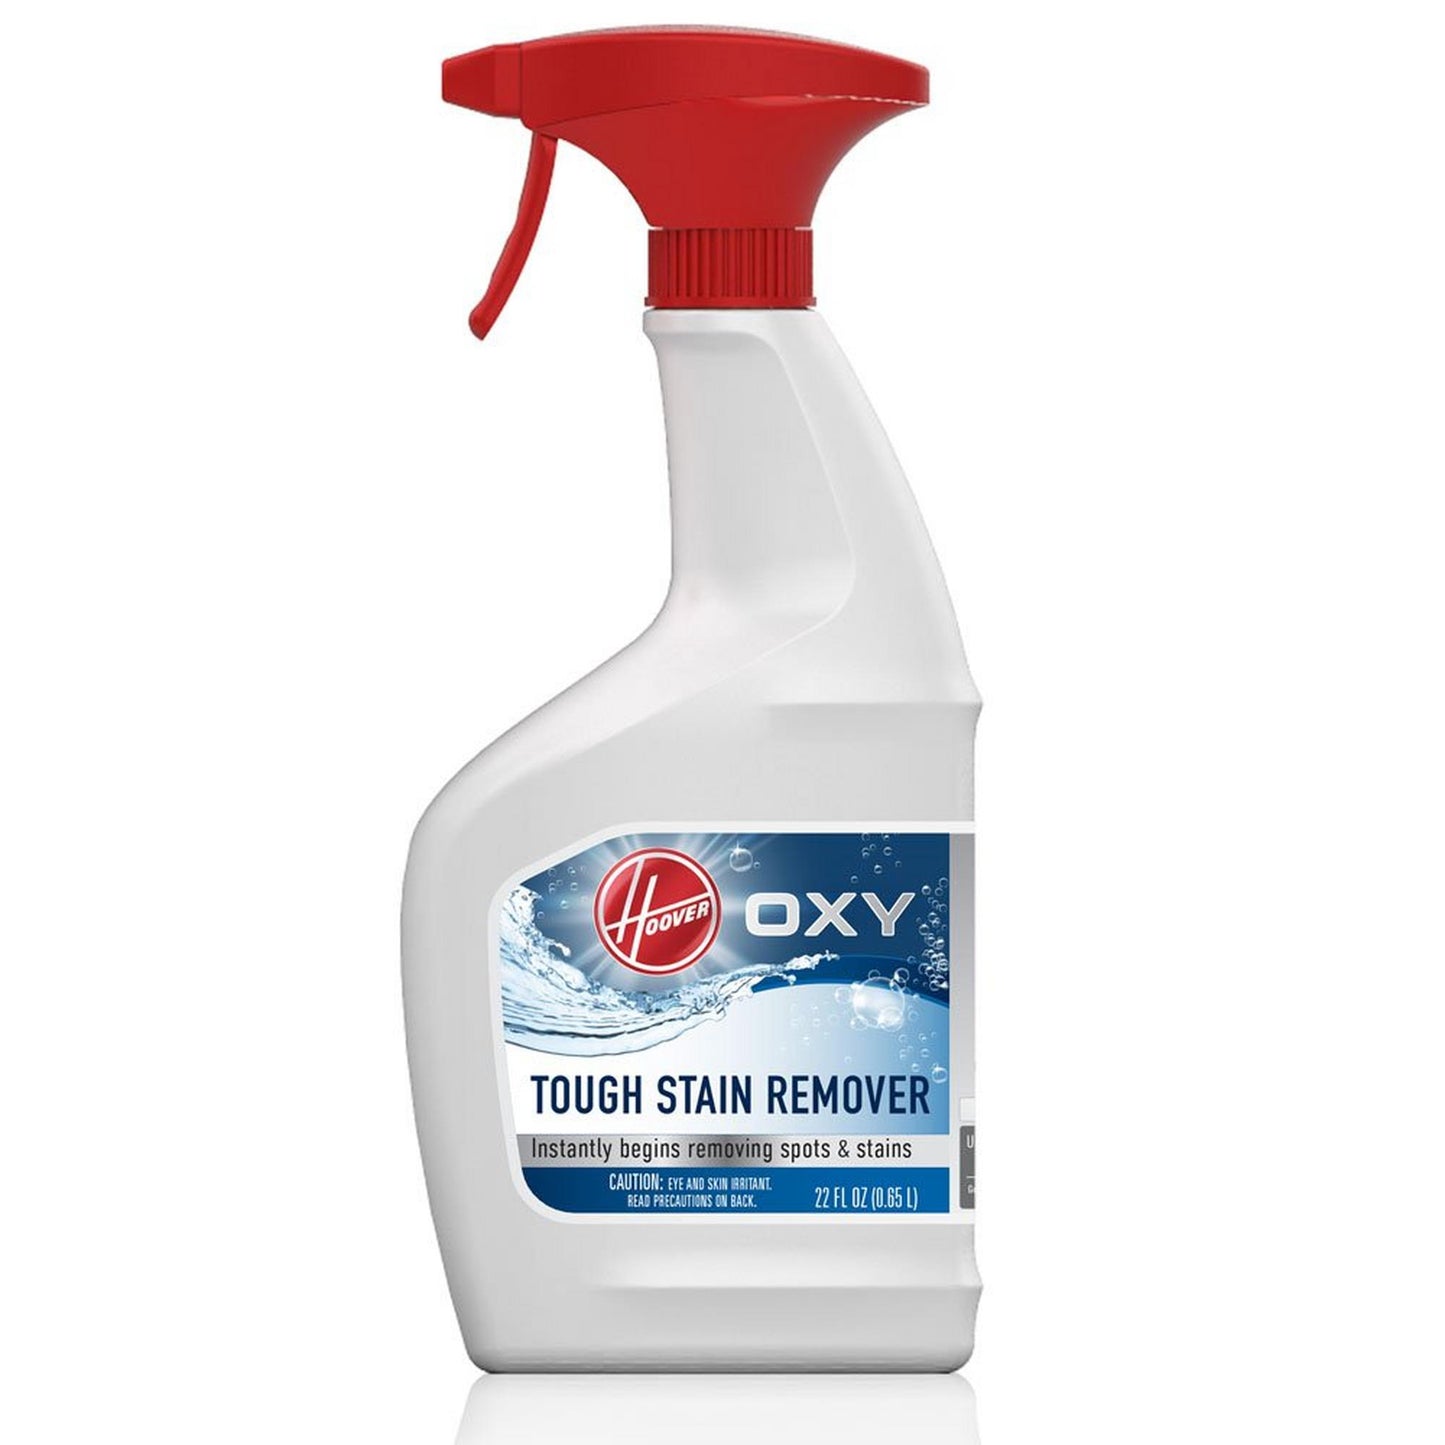 Oxy Stain Remover 22 oz.